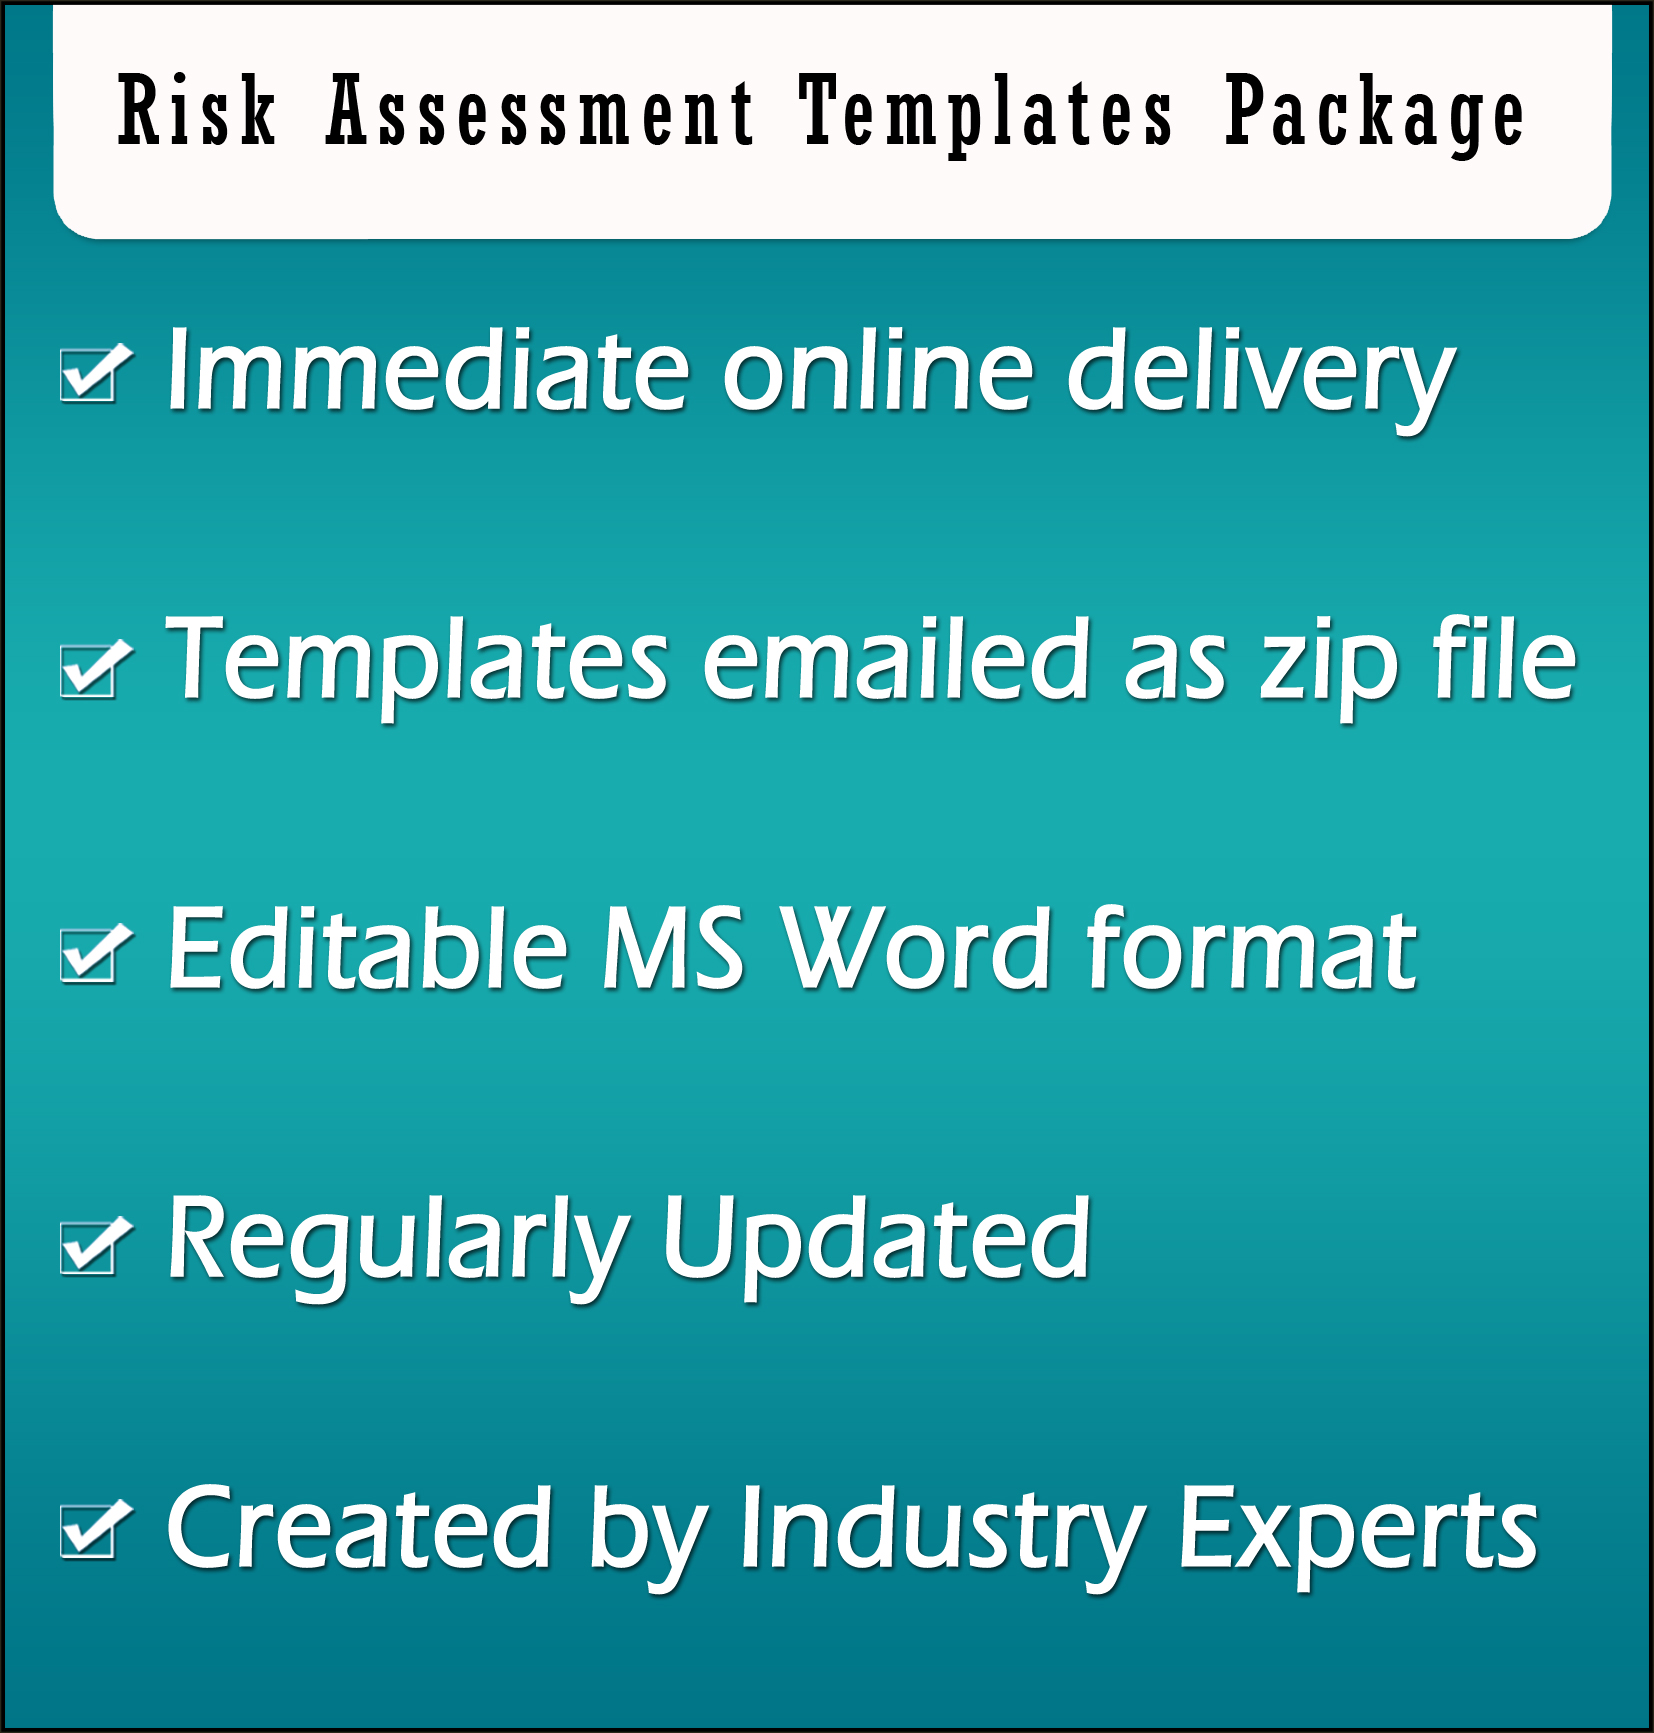 Risk Assessment Templates Package